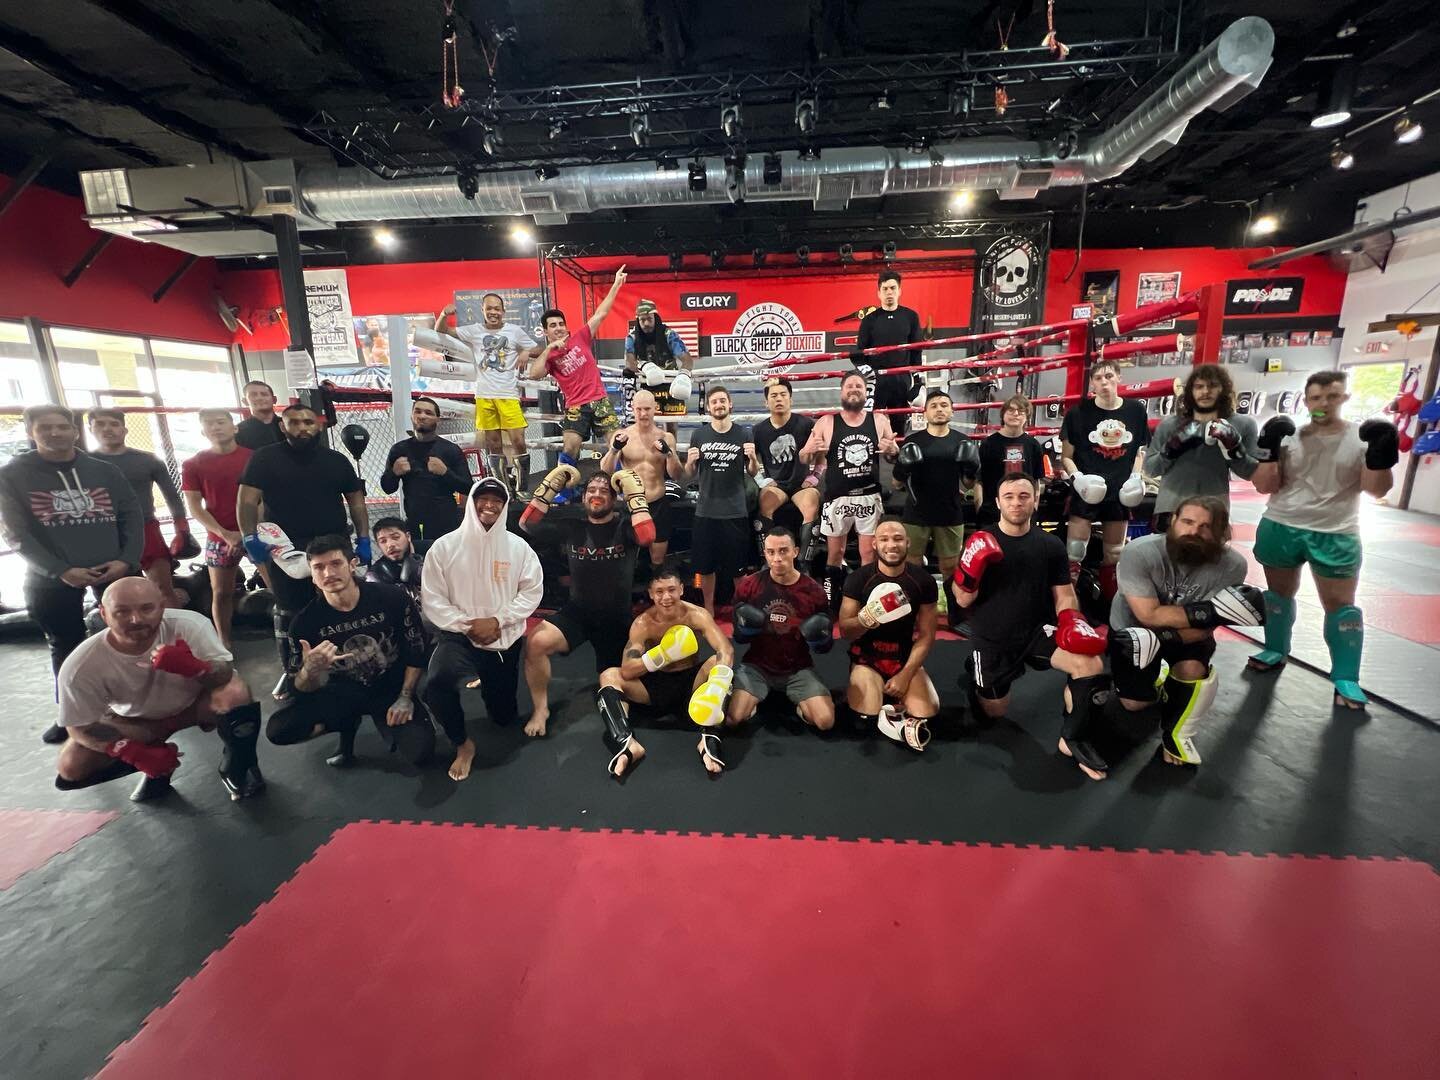 Another amazing Sunday of community Sparring! 

Thanks for everybody&rsquo;s hard-working consistency and looking forward to seeing everybody next week! 

#MuayThai #punch #family #fitness #competition #love #gring #work #red #black #gray #boxinggym 